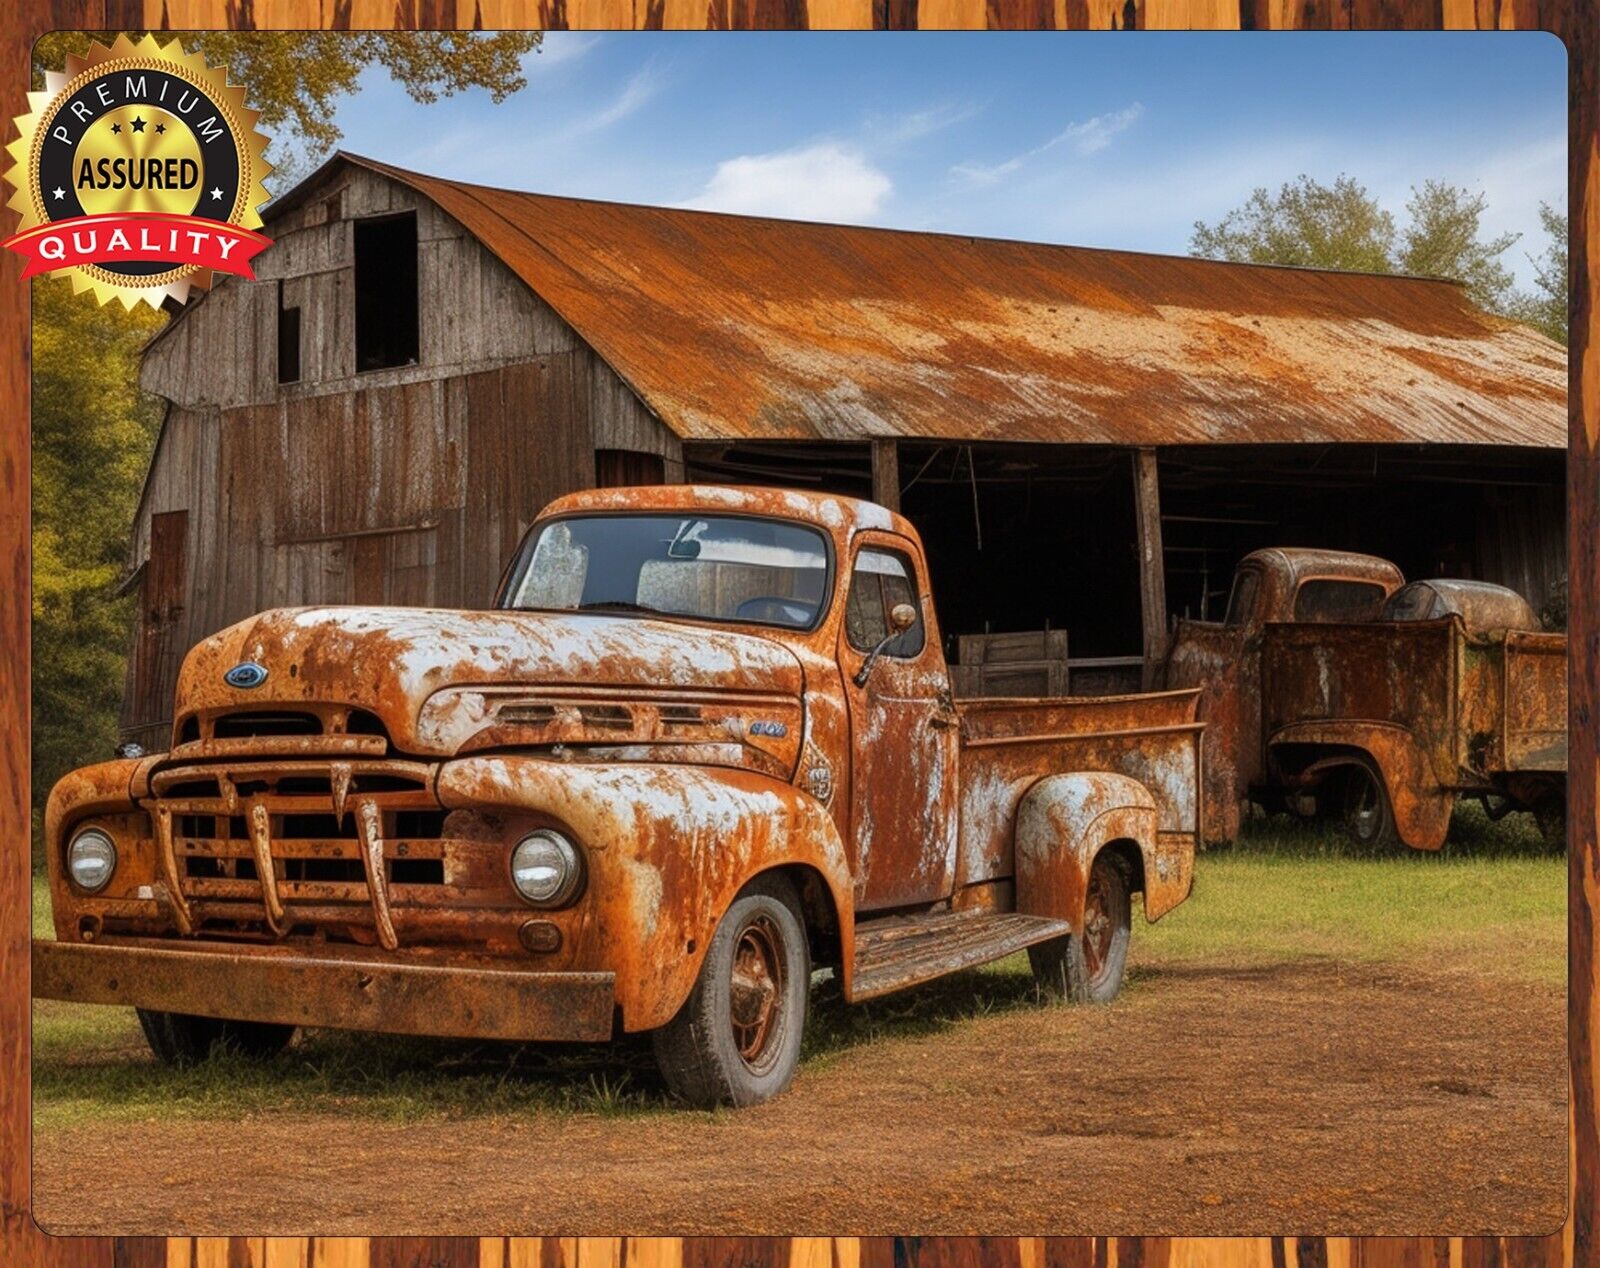 Ford F-Series - Vintage - Rusted Truck On Farm - Metal Sign 11 x 14